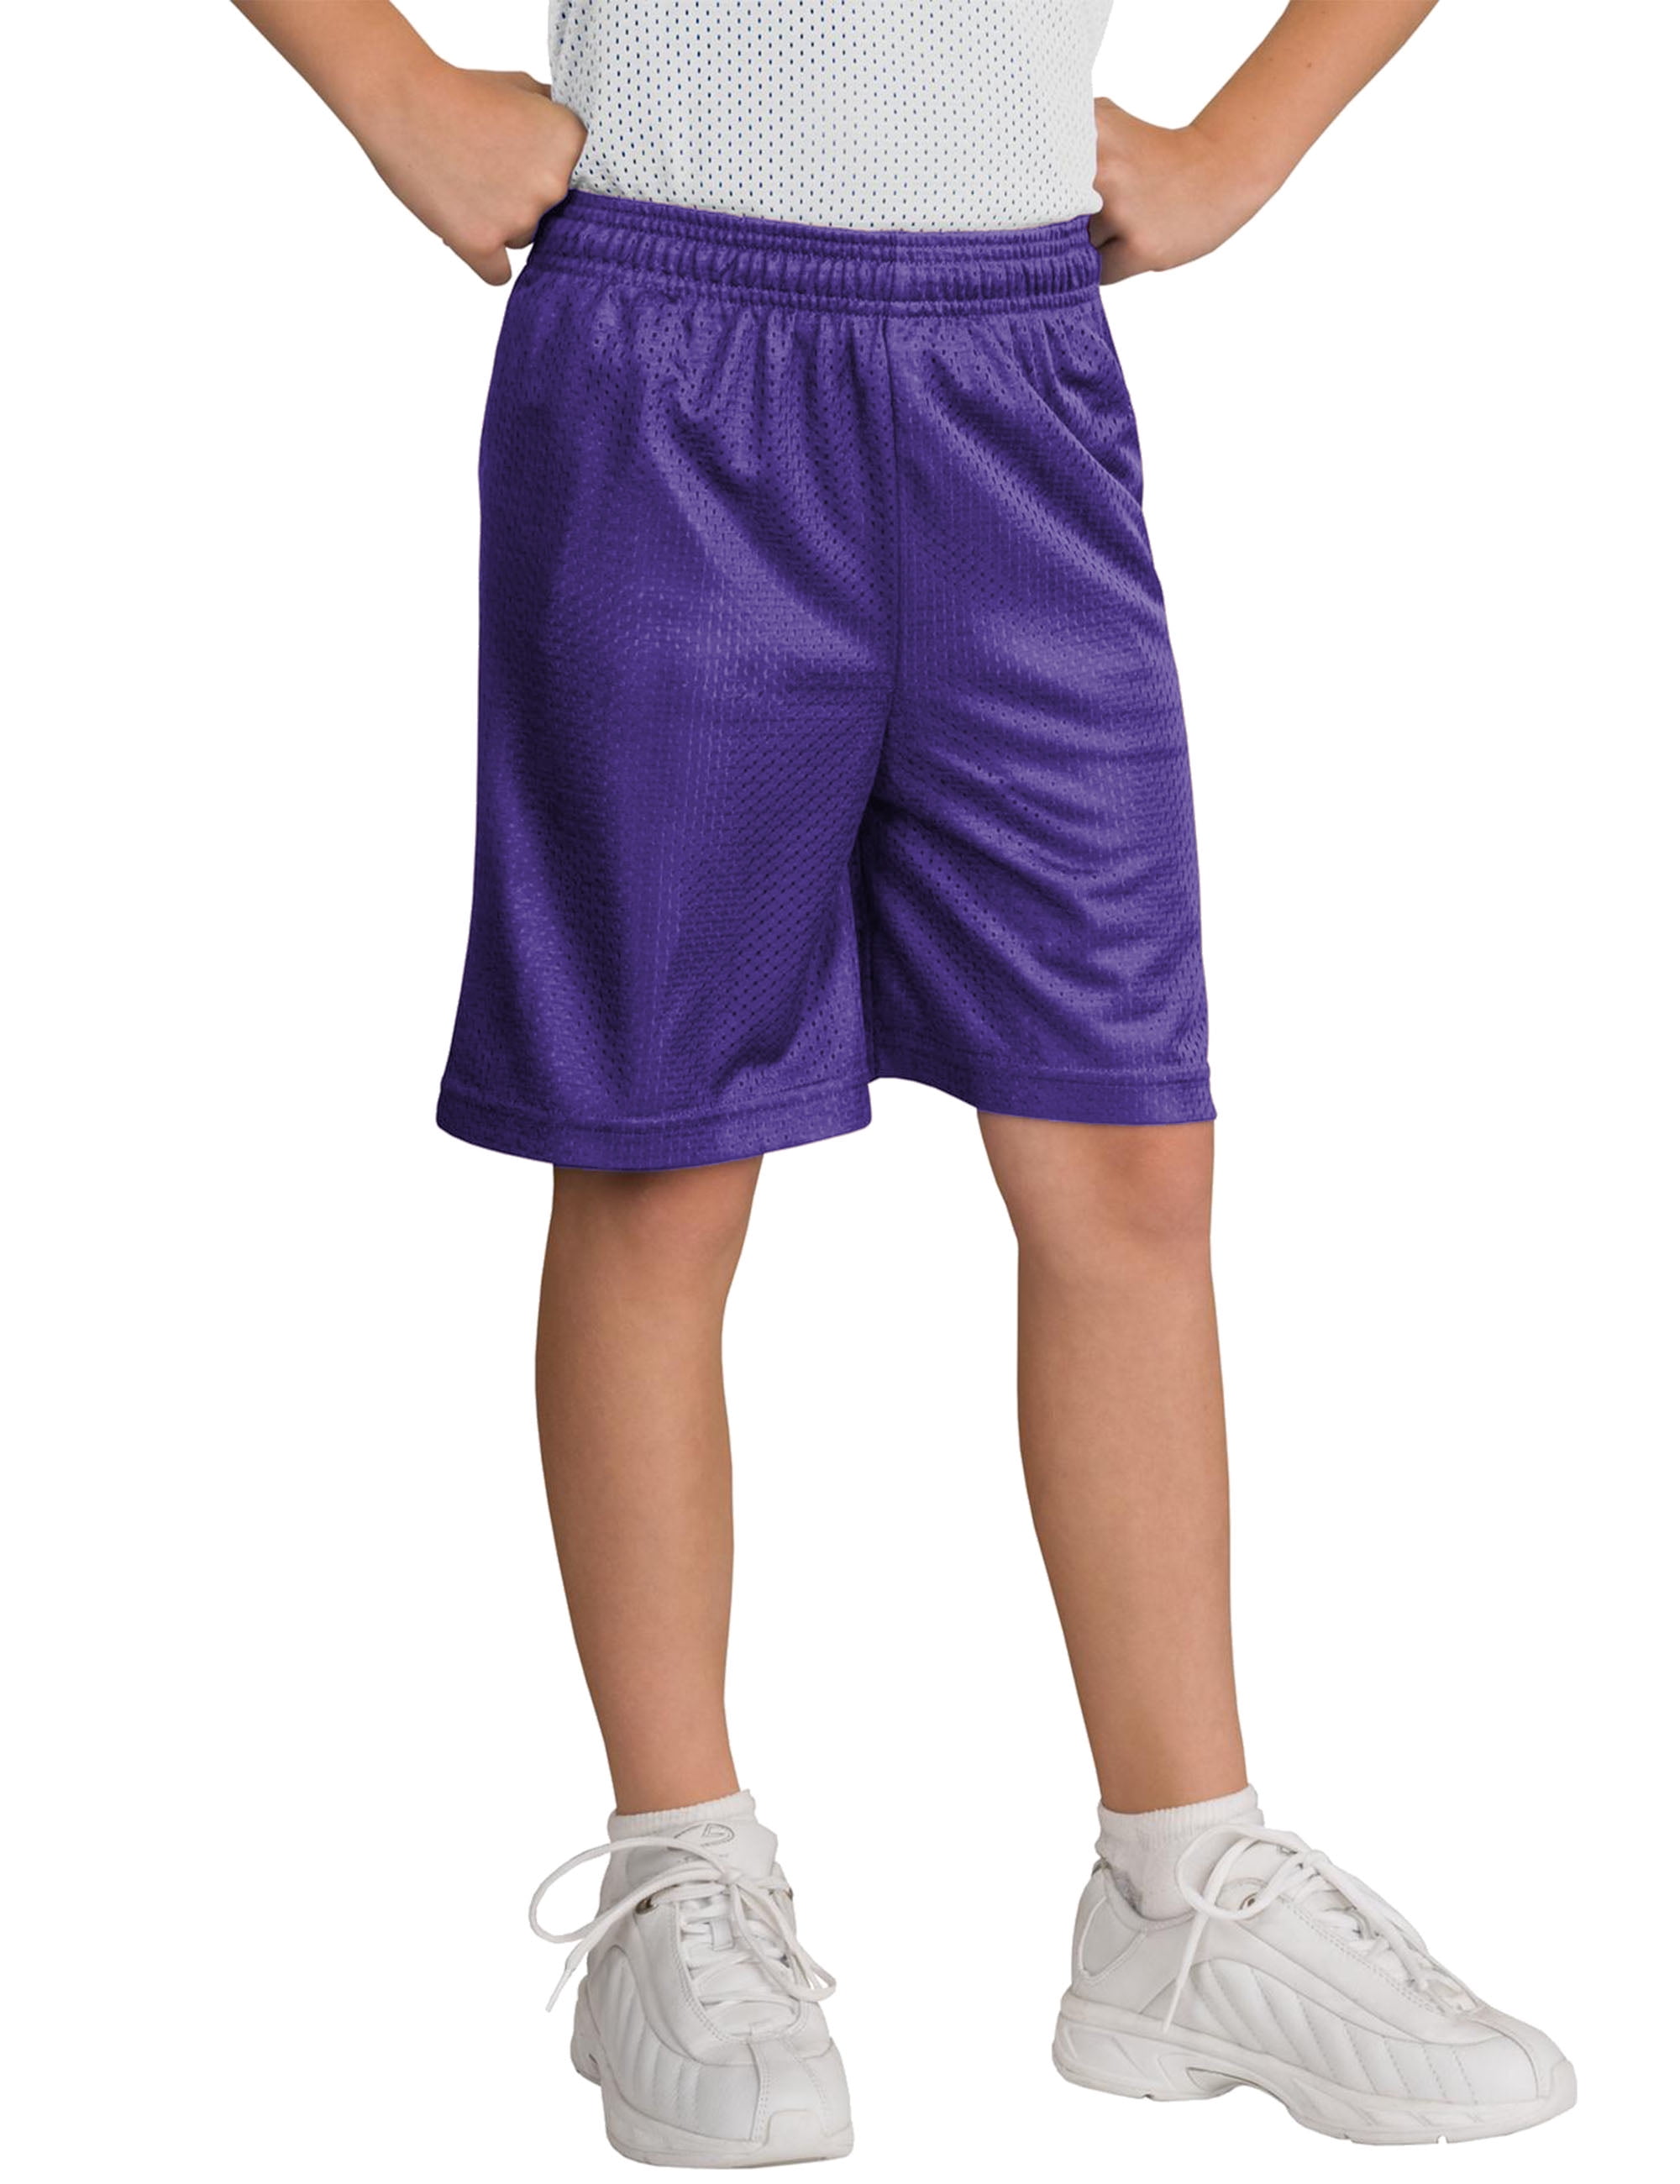 Ma Croix Kids Mesh Shorts Gym Soccer Basketball Athletic Casual ...